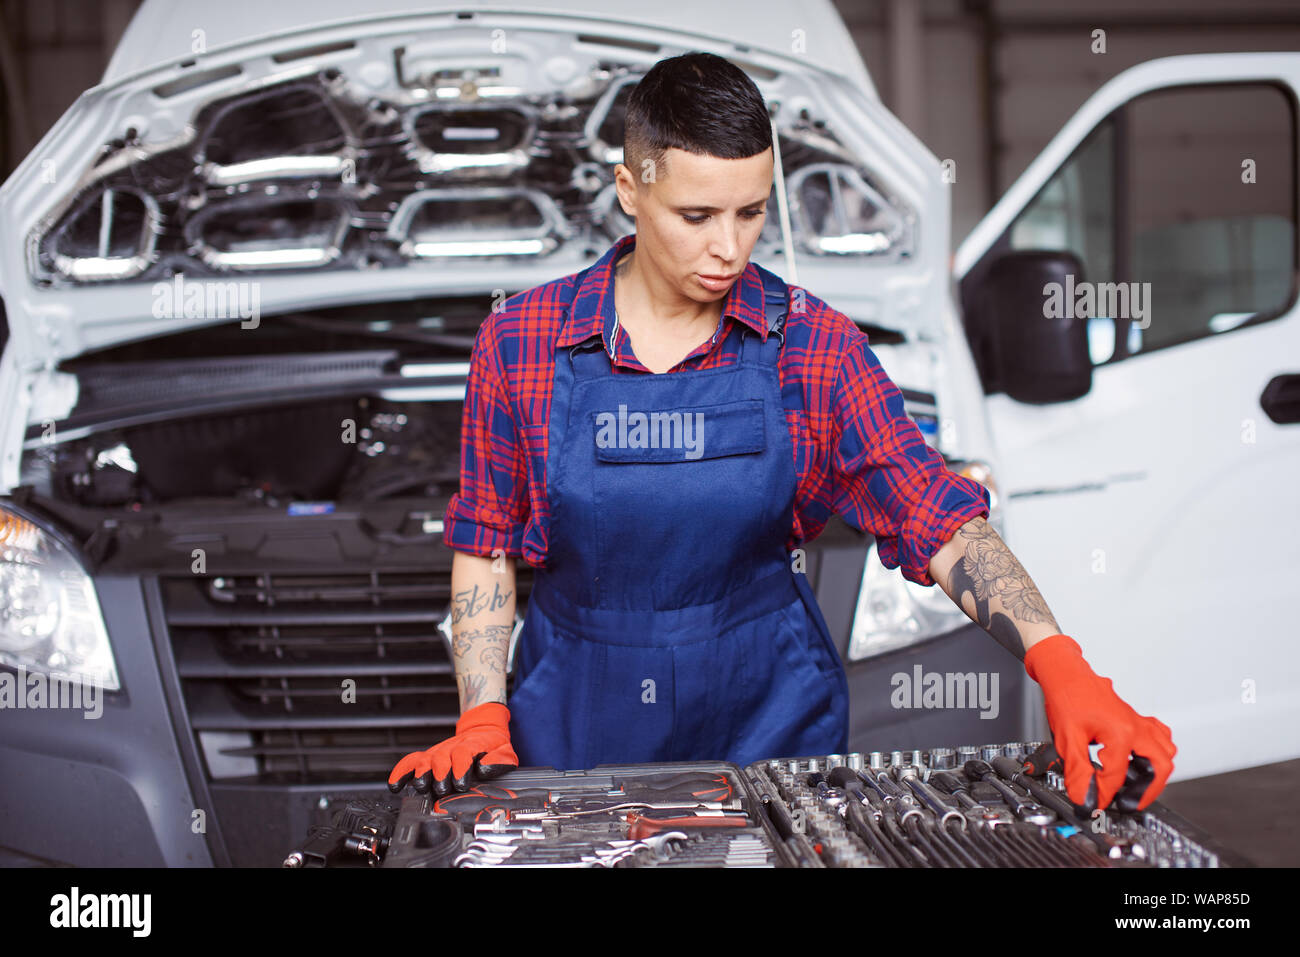 Woman works at the car repair checking whether she has all the instruments she could possibly need for her work. Stock Photo